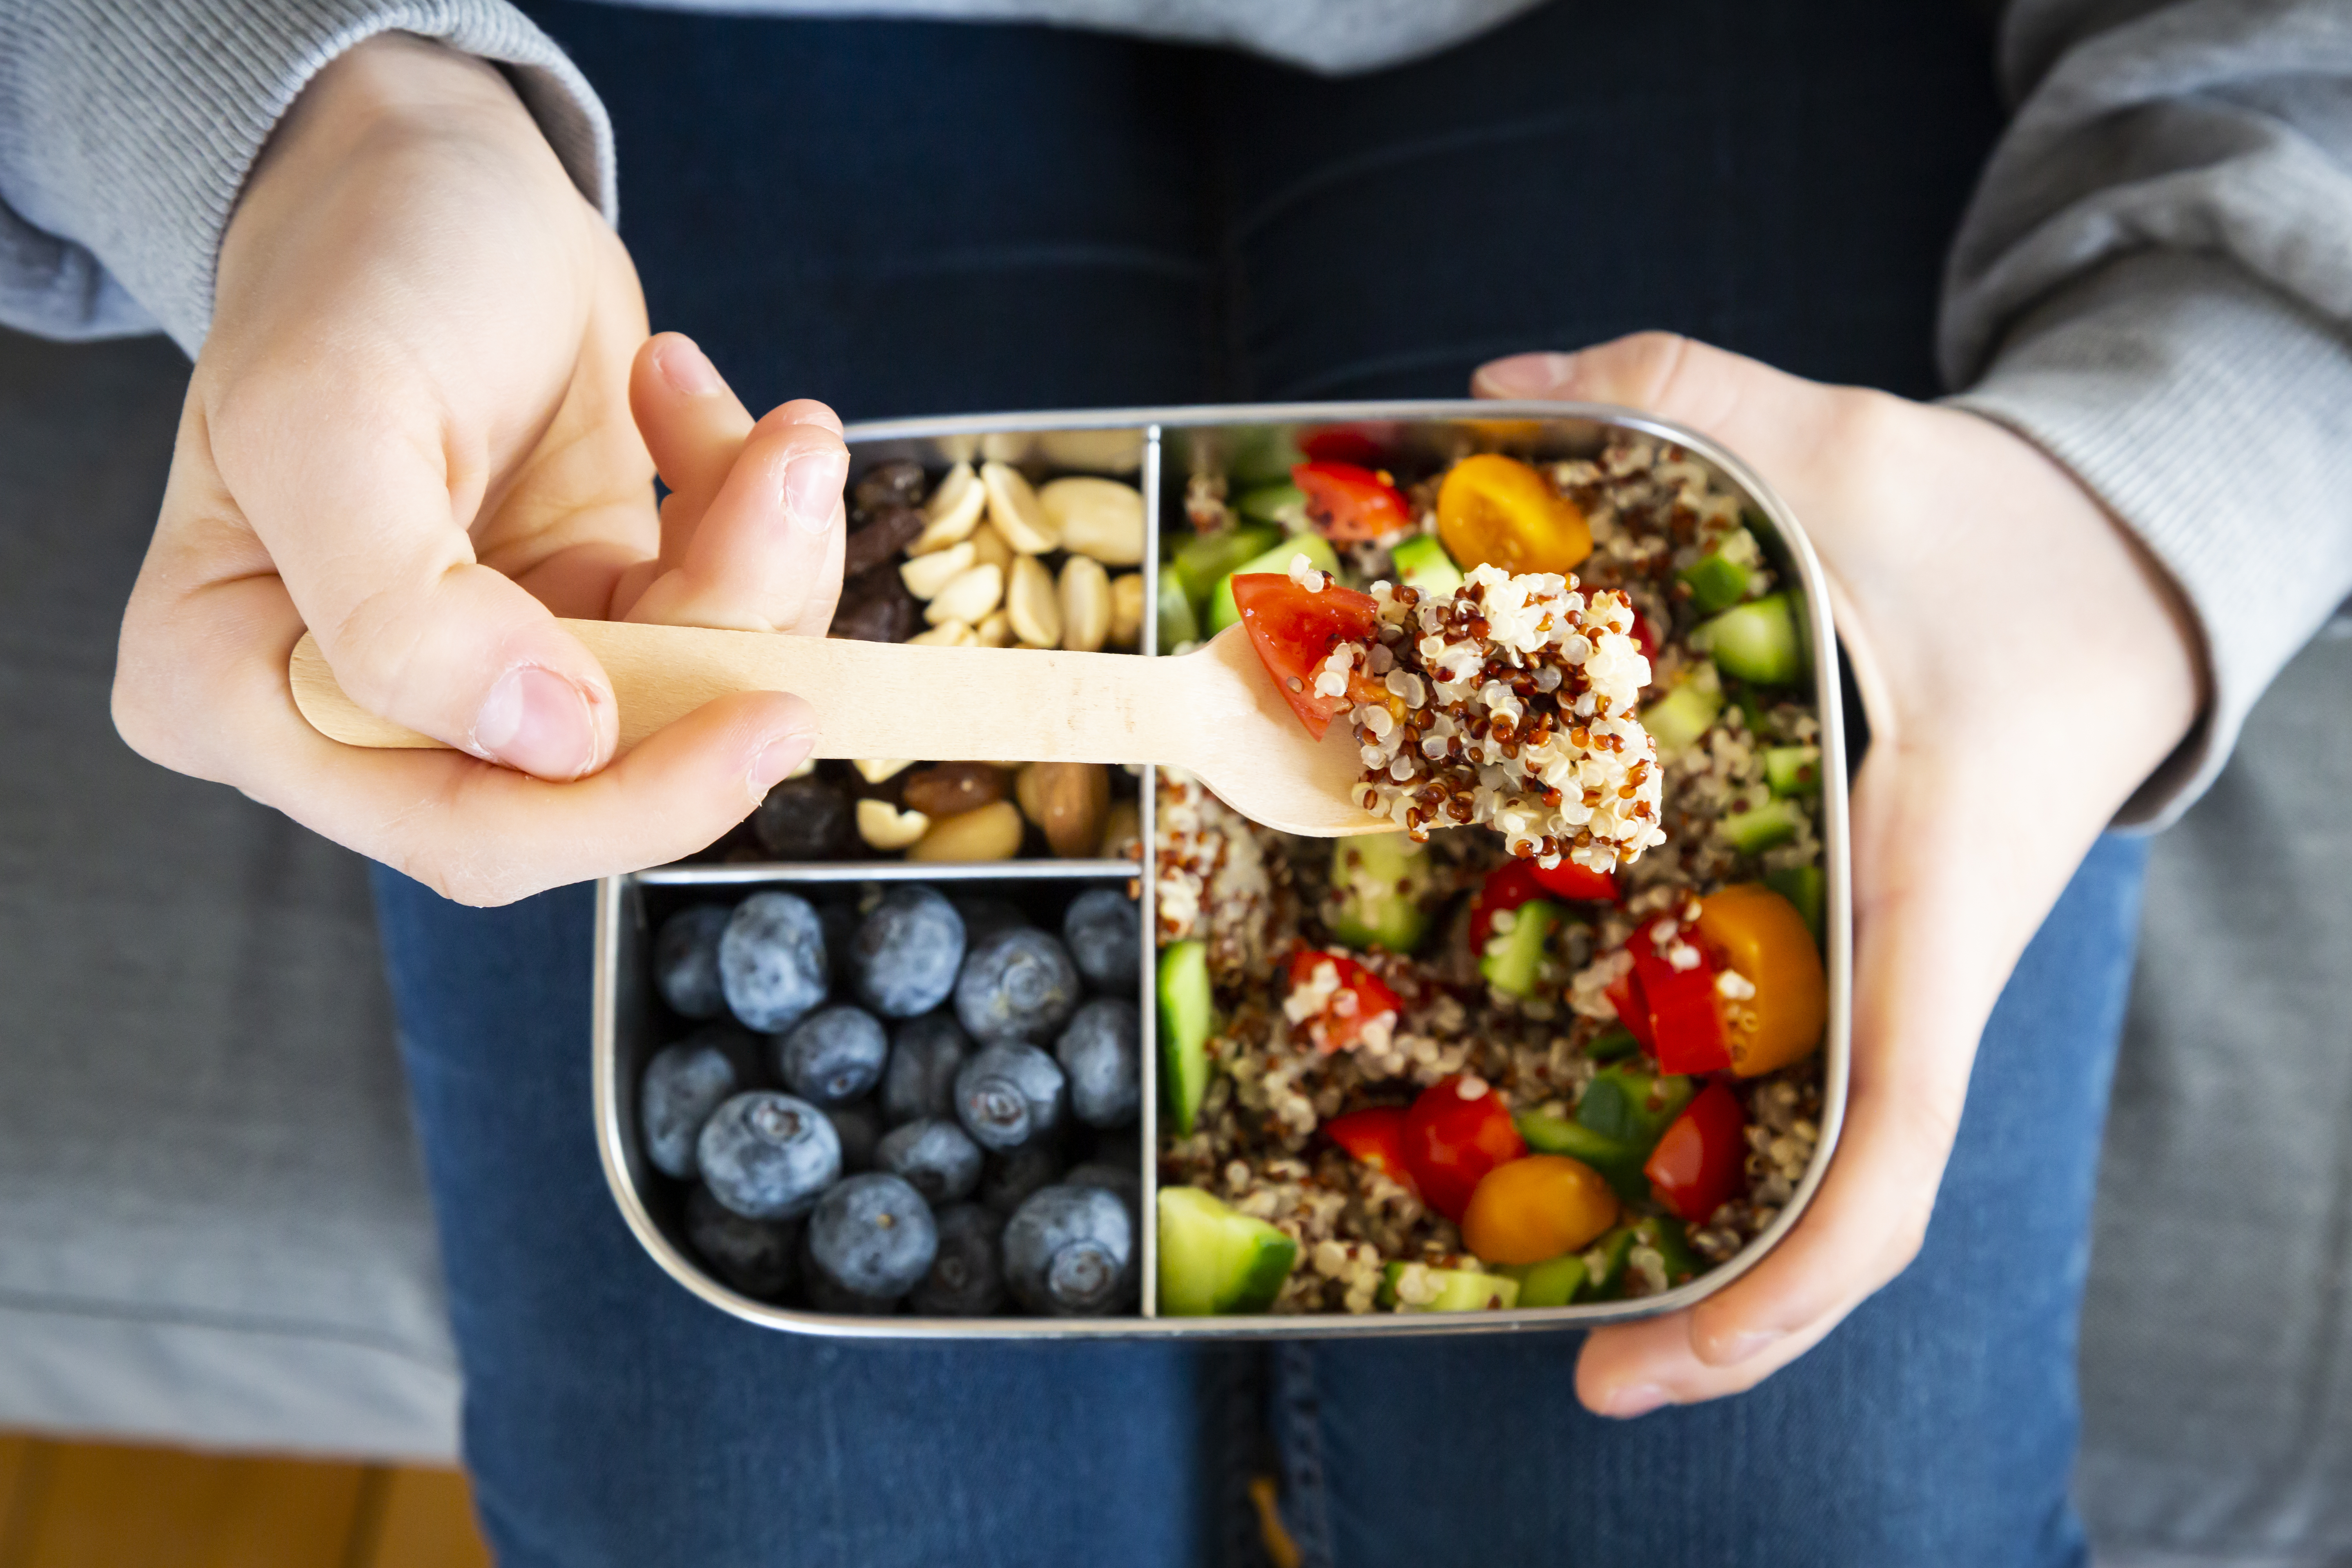 Lunch boxes should include at least one portion of fruit and one portion of vegetables for fibre and hydration.